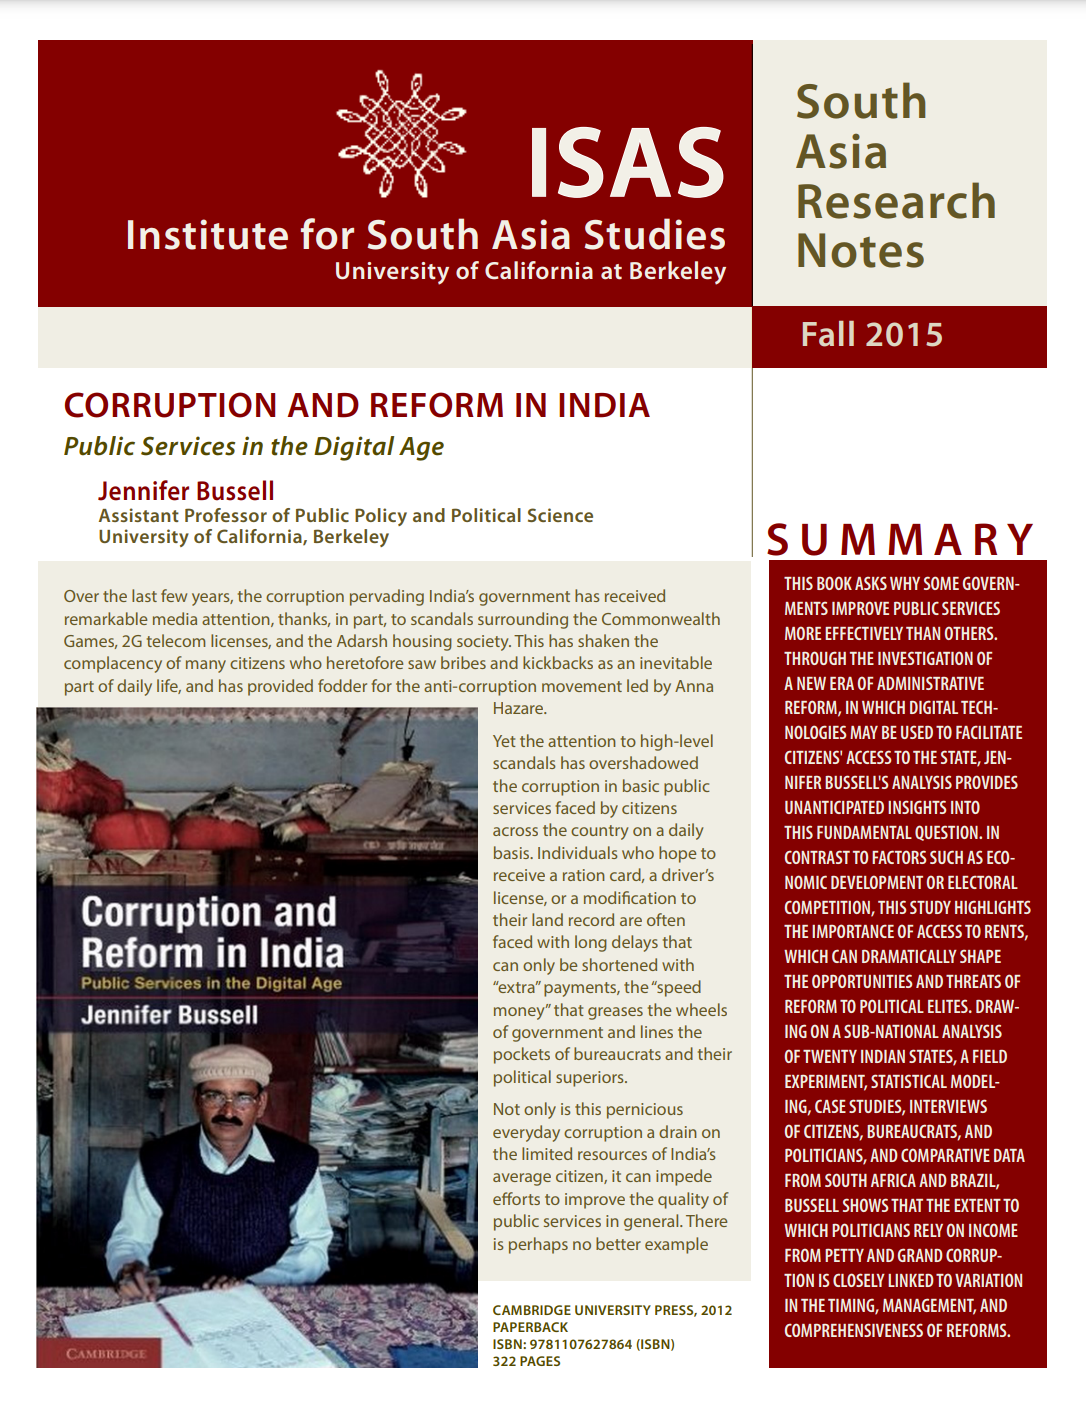 Corruption and Reform in India cover